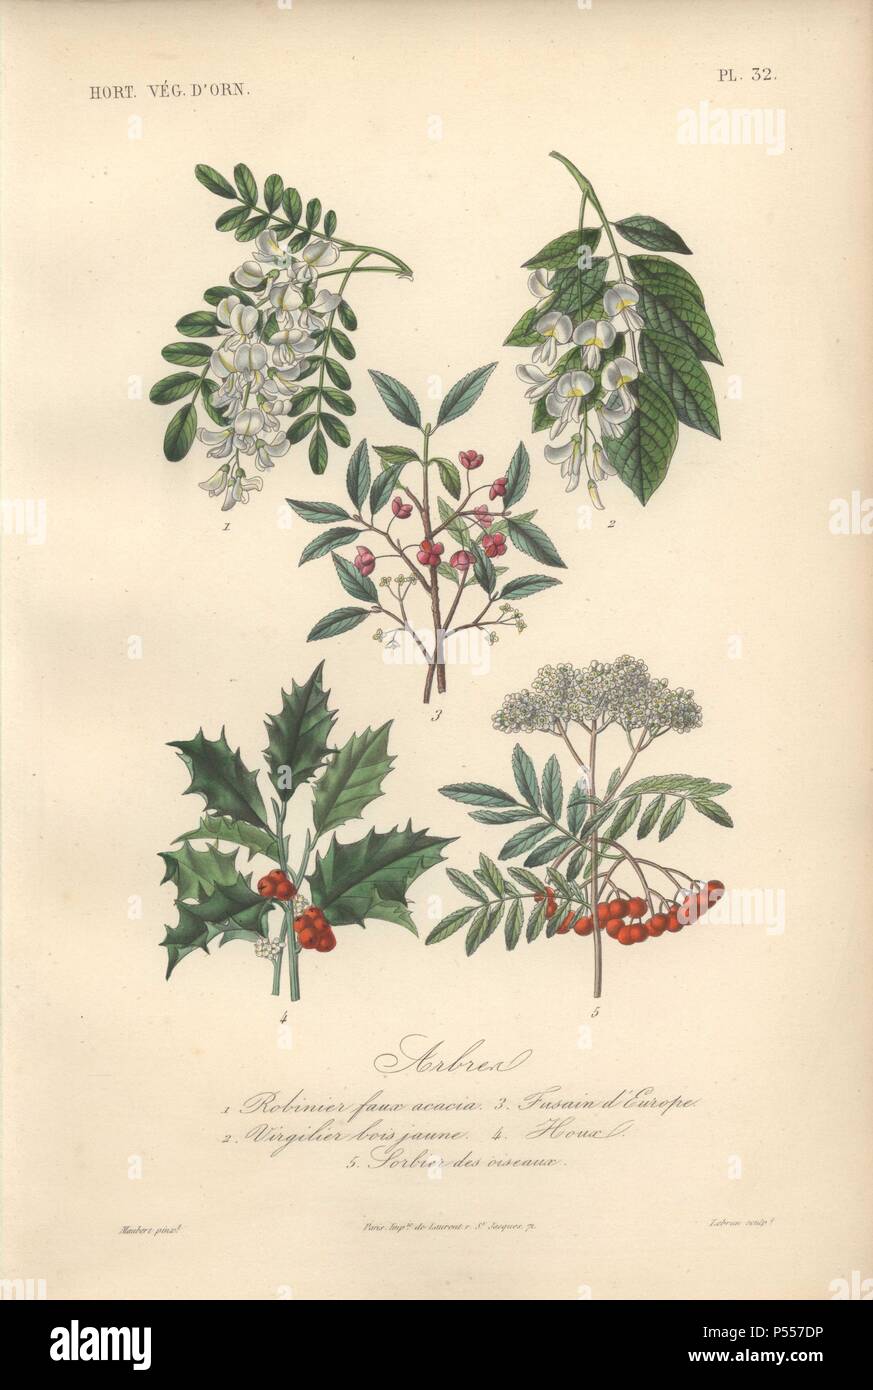 Five shrubs, including white-flowered black locust tree, white-flowered yellowwood tree, pink spindle tree (Euonymus europaeus), holly with scarlet berries, and scarlet rowan tree.. 1) Robinier Faux Acacia 2) Vergilier Bois Jaune 3) Fusain d'Europe 4) Houx 5) Sorbier Des Oiseaux . . Handcolored lithograph by Edouard Maubert for Herincq's 'Le Regne Vegetal' (1865). Stock Photo